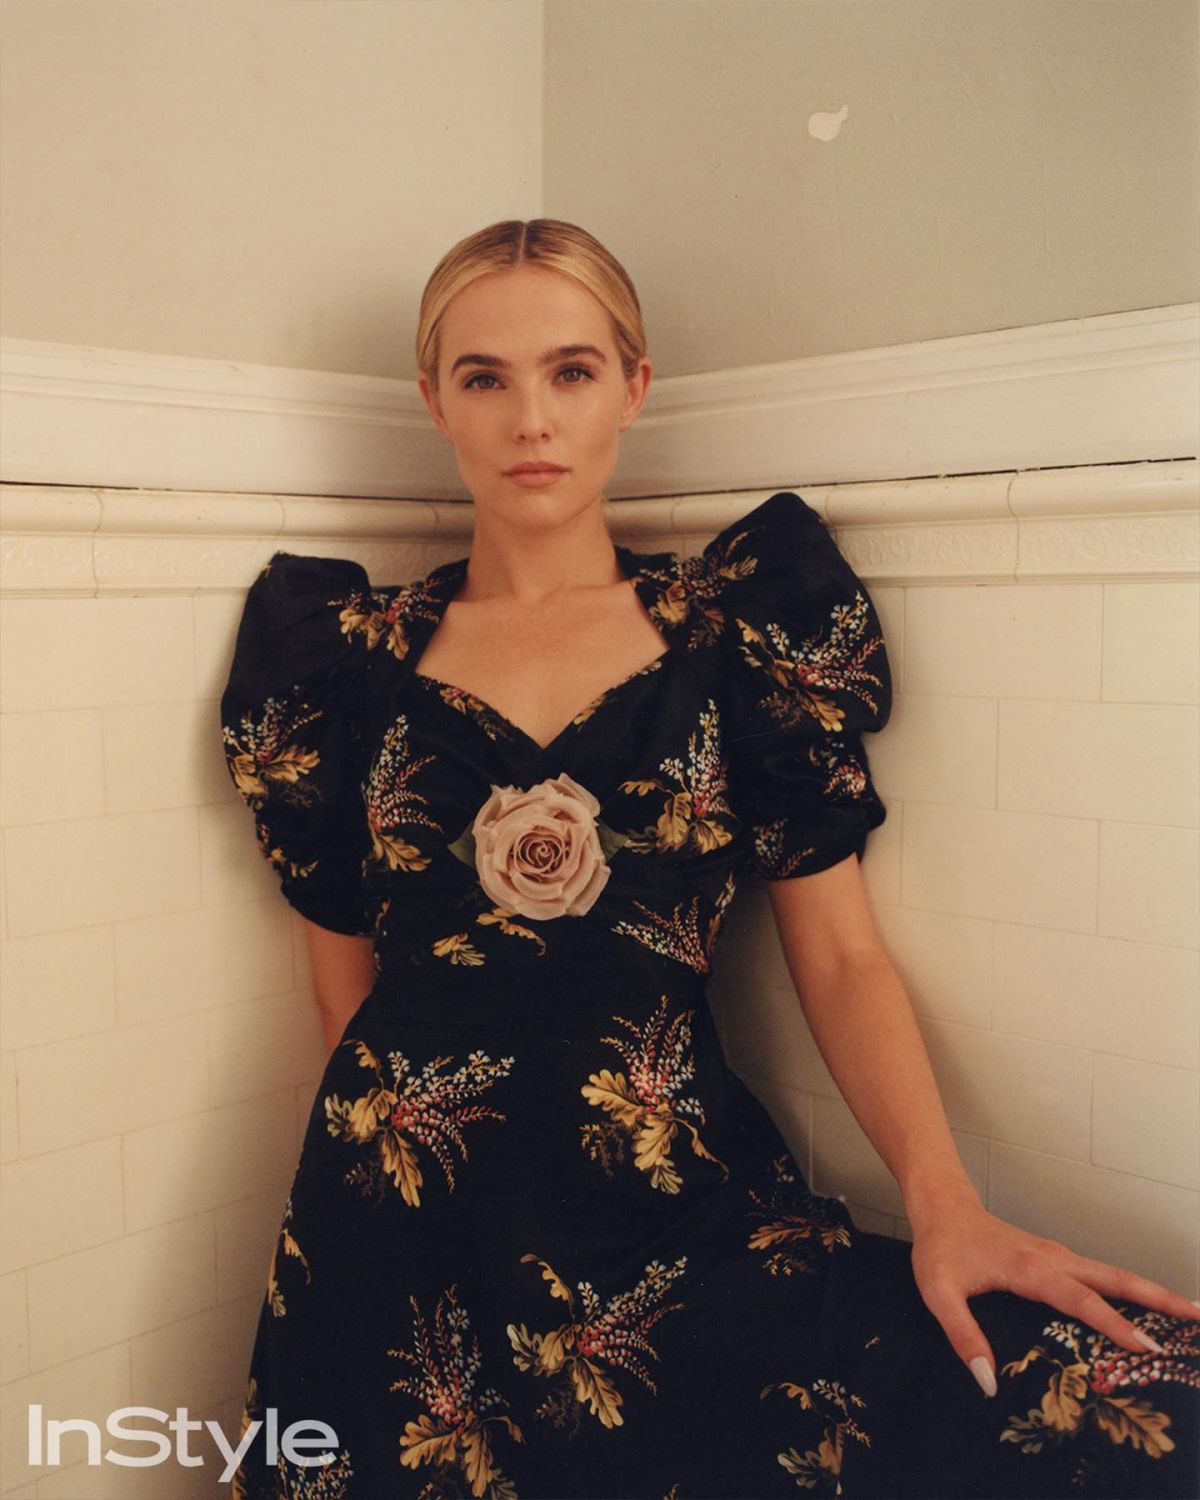 ZOEY DEUTCH for Instyle Magazine, Mexico September 2022. 